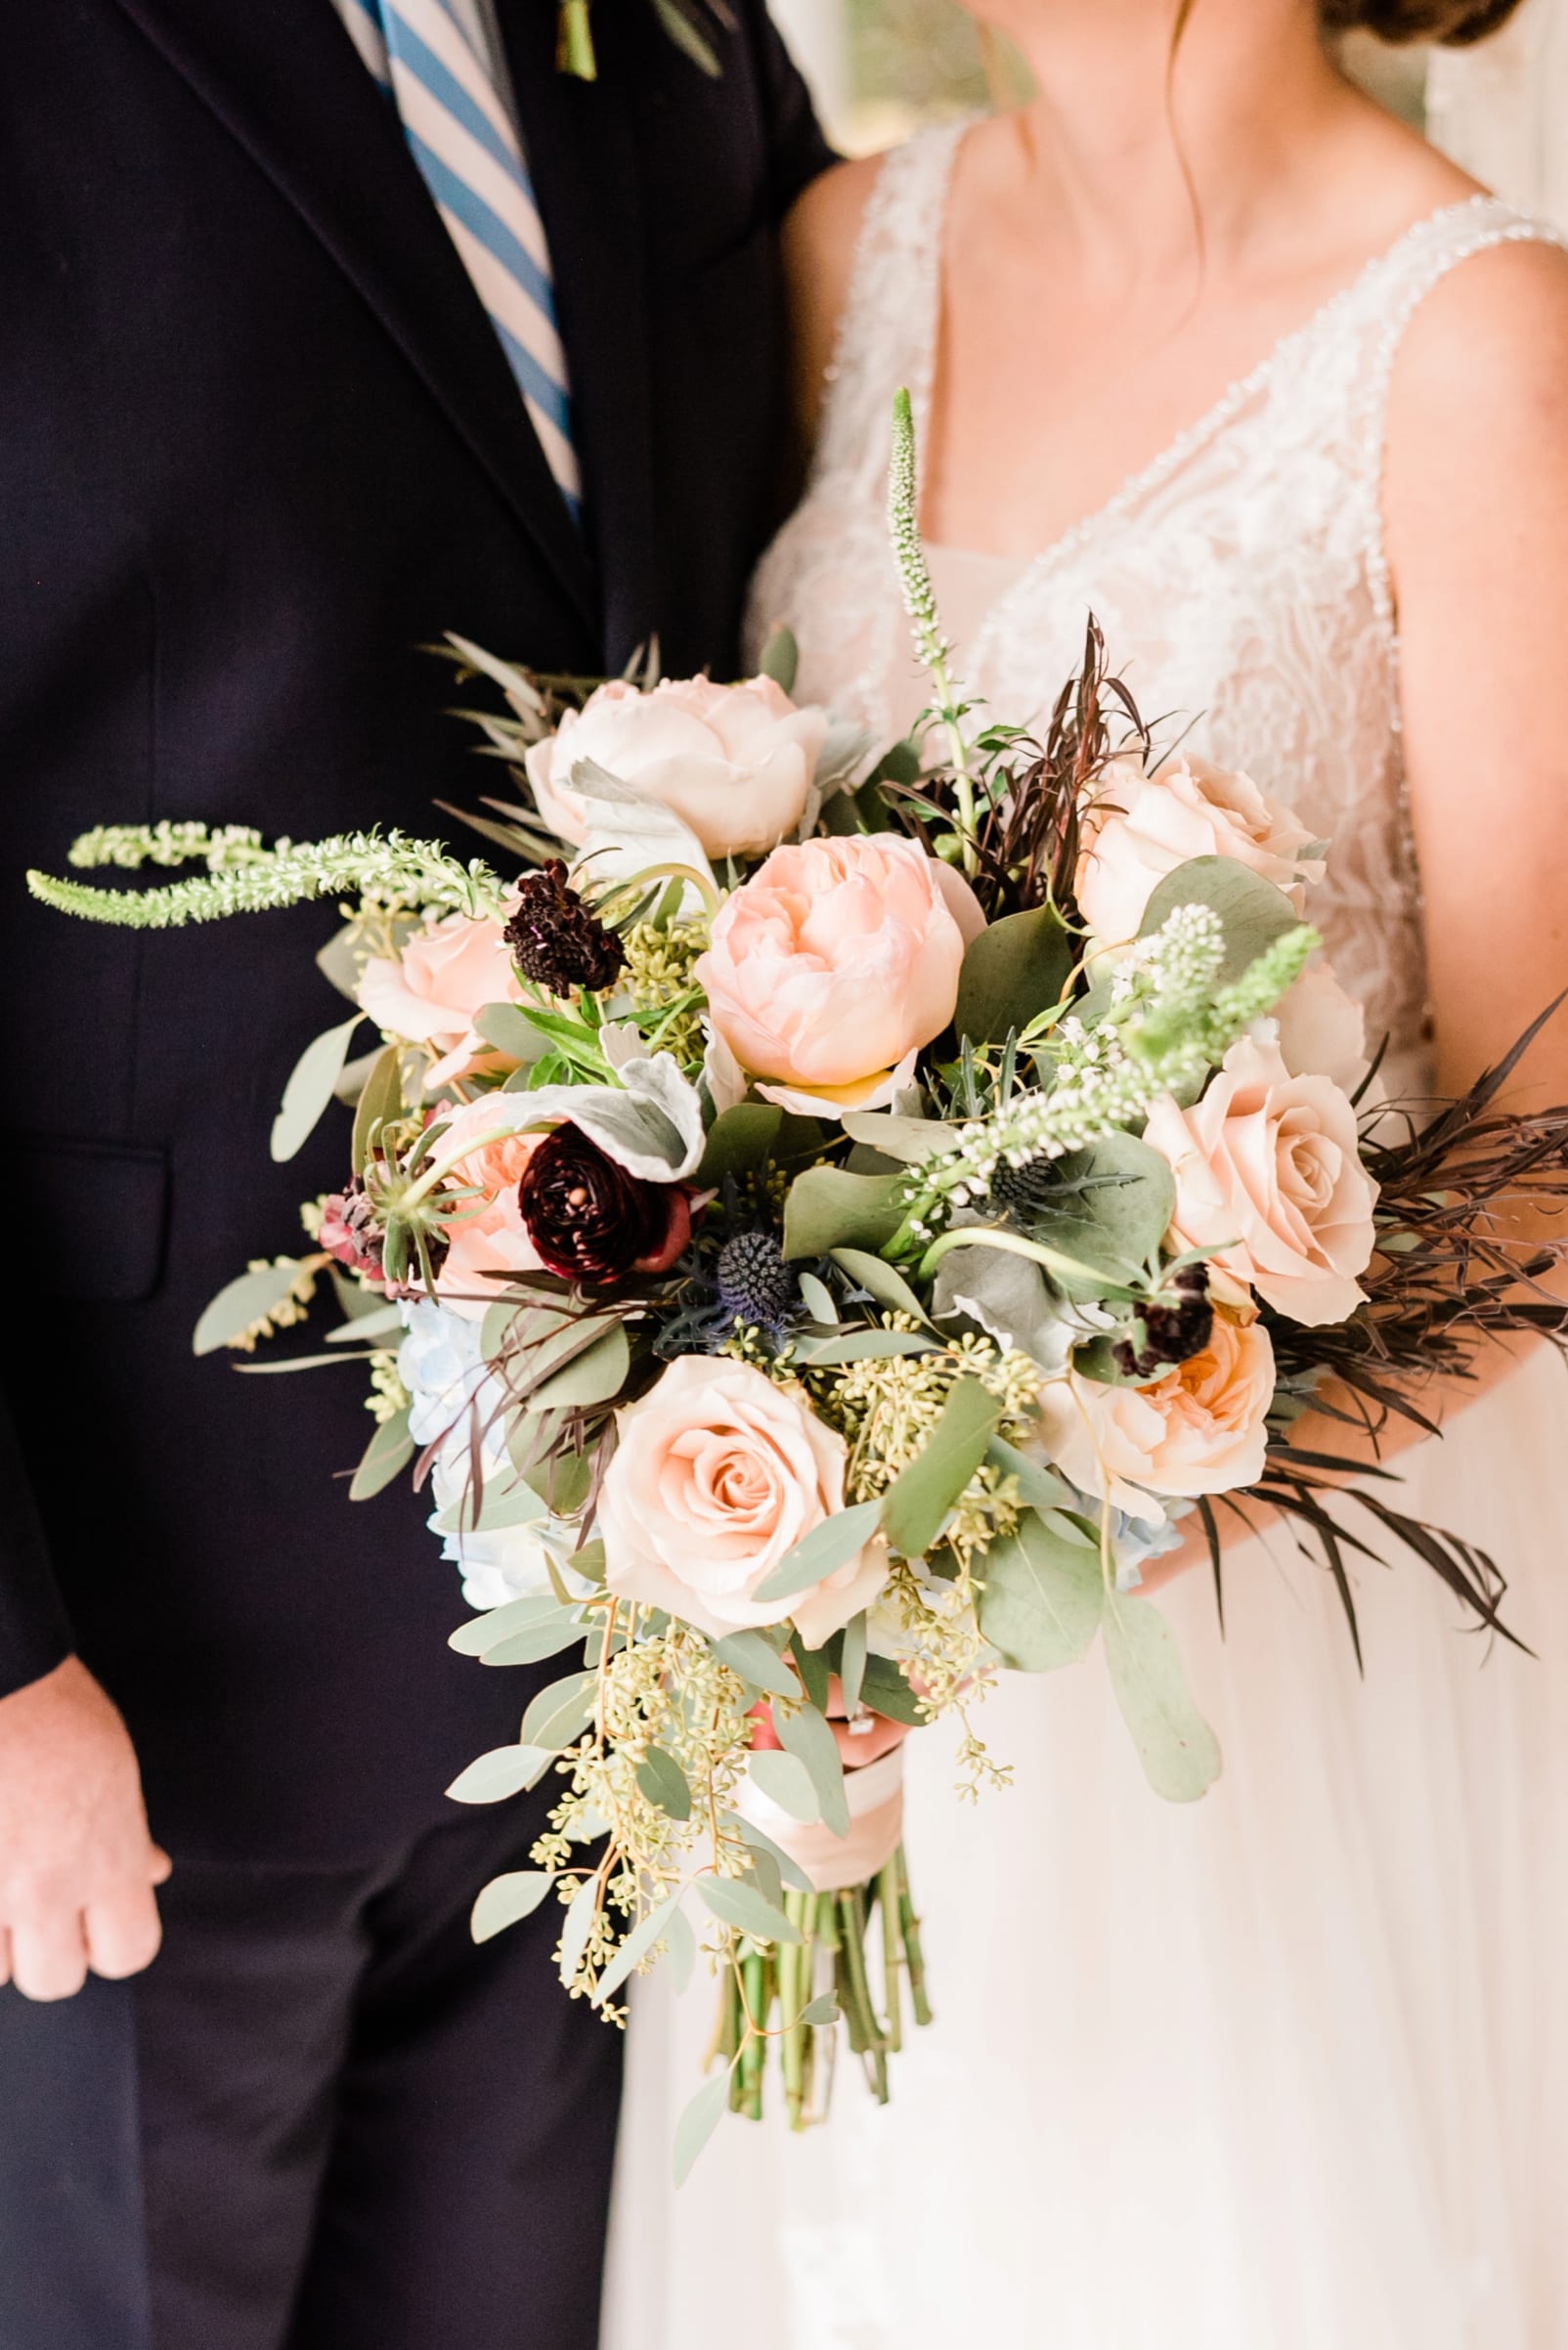 University Florist bridal bouquet with deep purple, peach and cream flowers and sprigs of light greenery photo